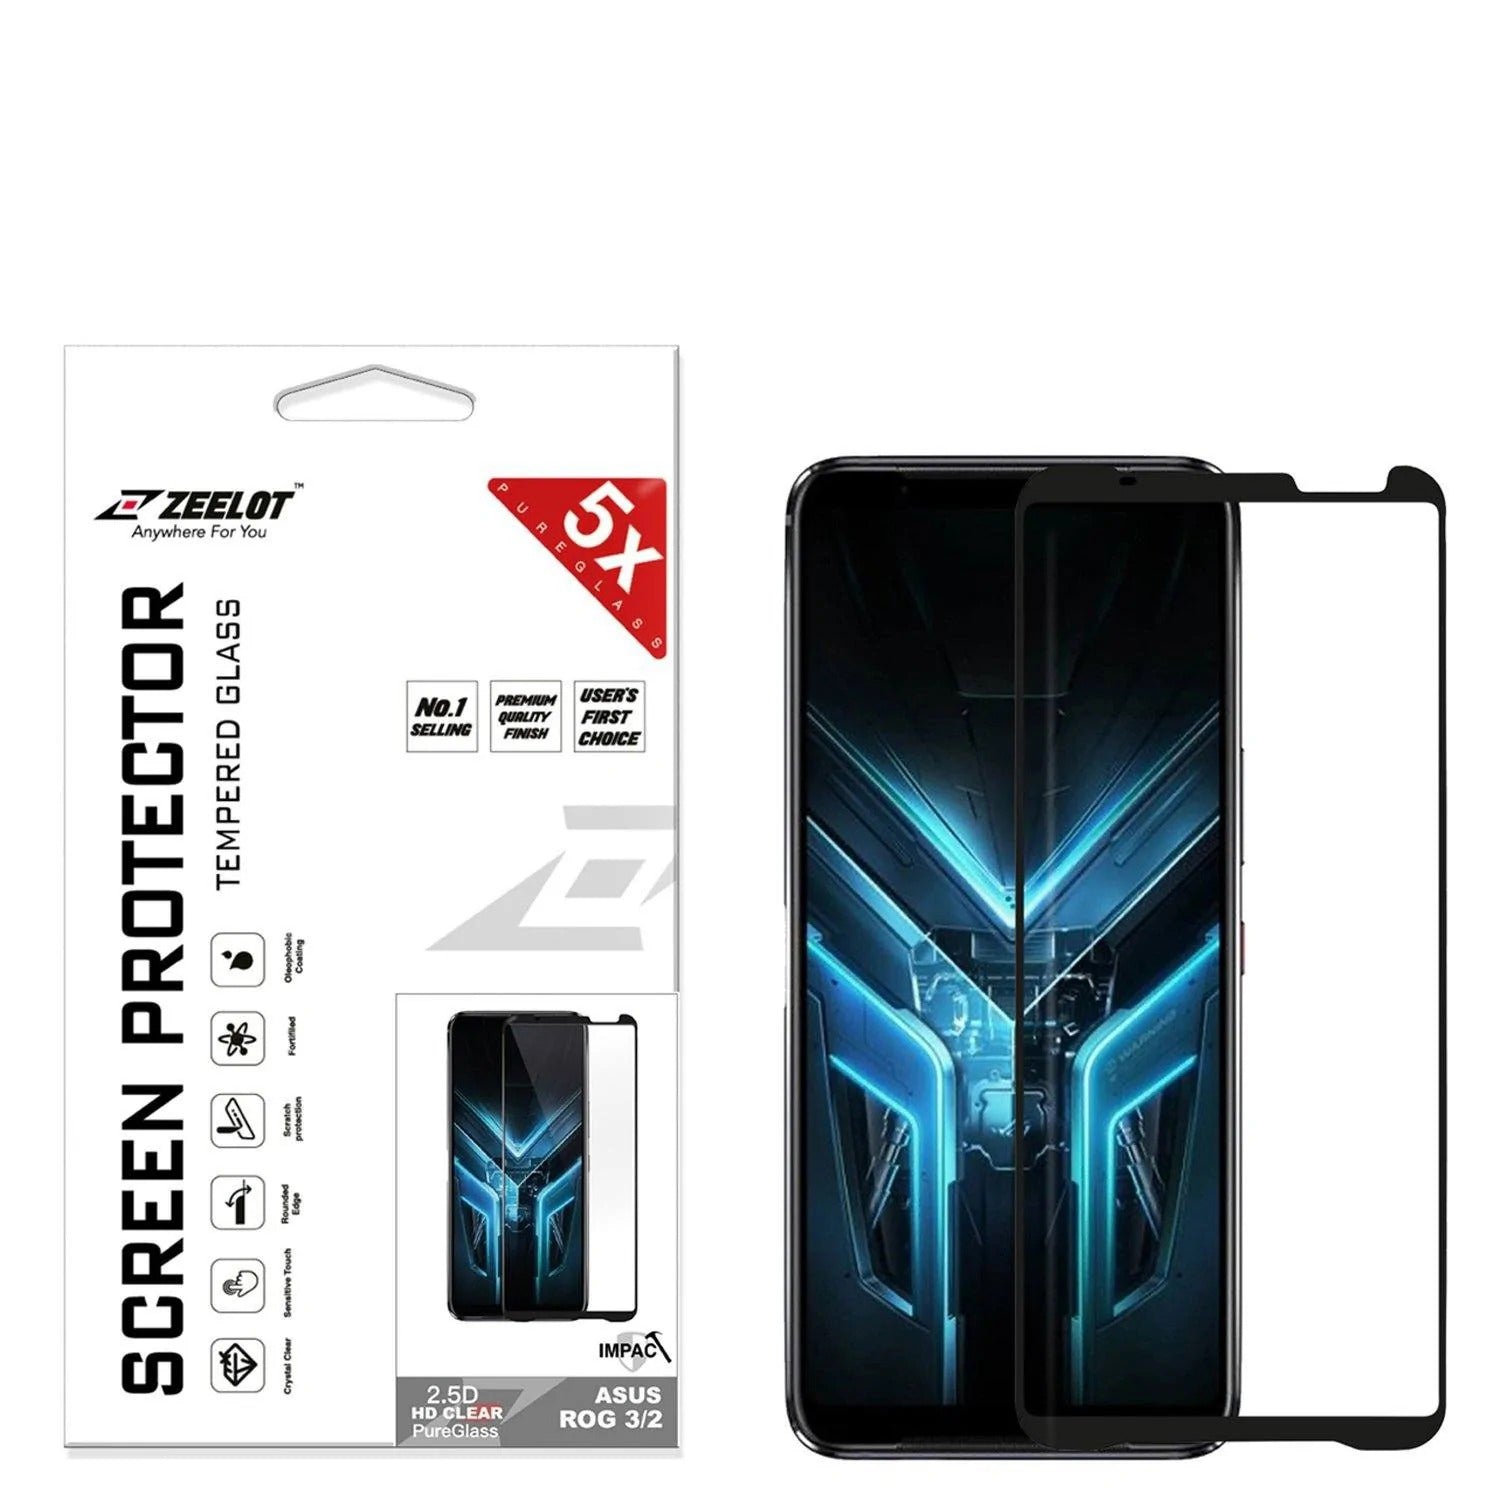 ZEELOT PureGlass 2.5D Tempered Glass Screen Protector for Asus ROG 2/3, Clear Privacy Tempered Glass ZEELOT Clear 